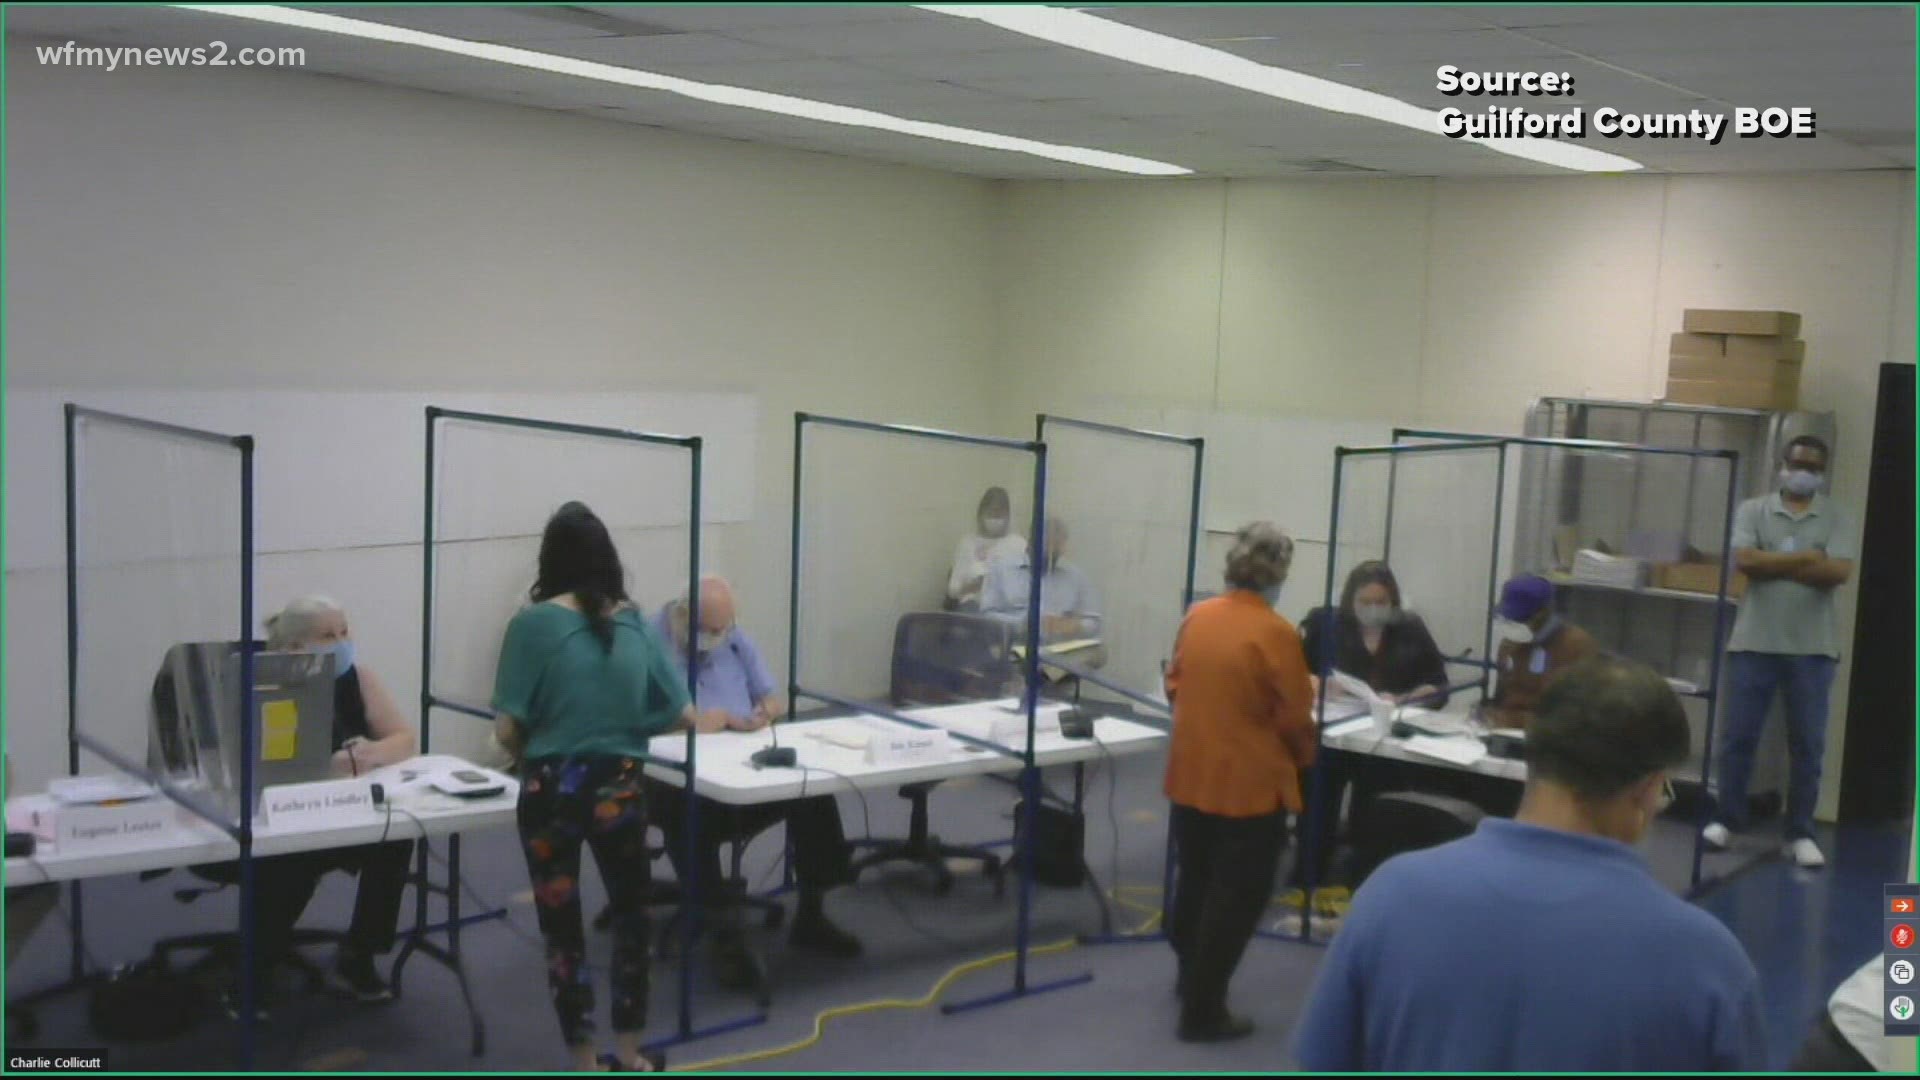 The board is counting absentee and early voting ballots. The results won't come out until Election Day.